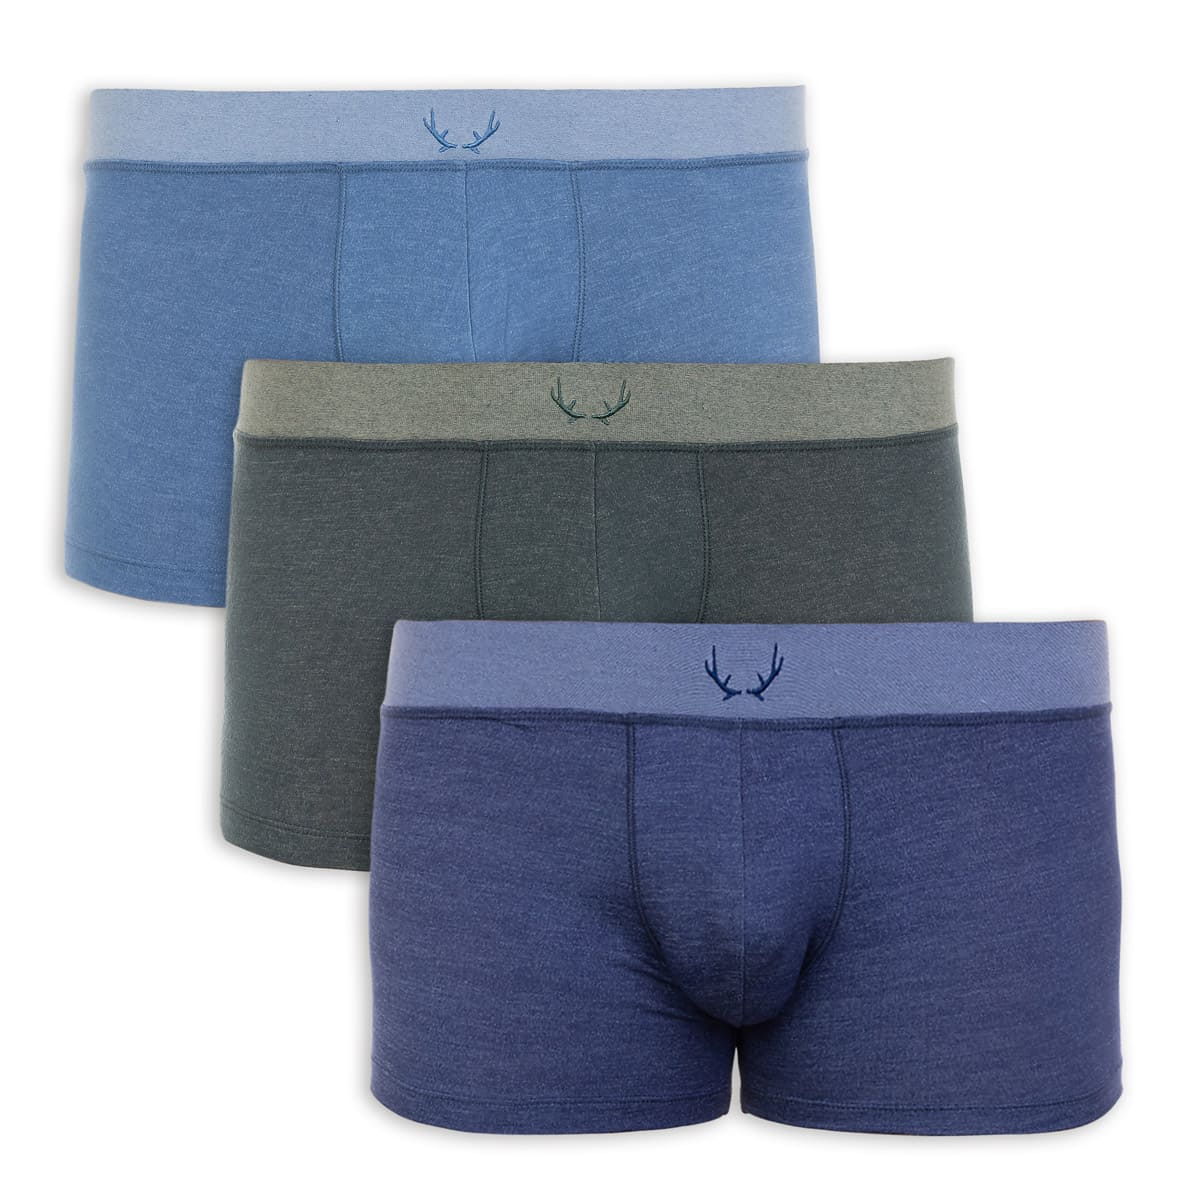 Boxer shorts 3-pack made of Tencel by Bluebuck